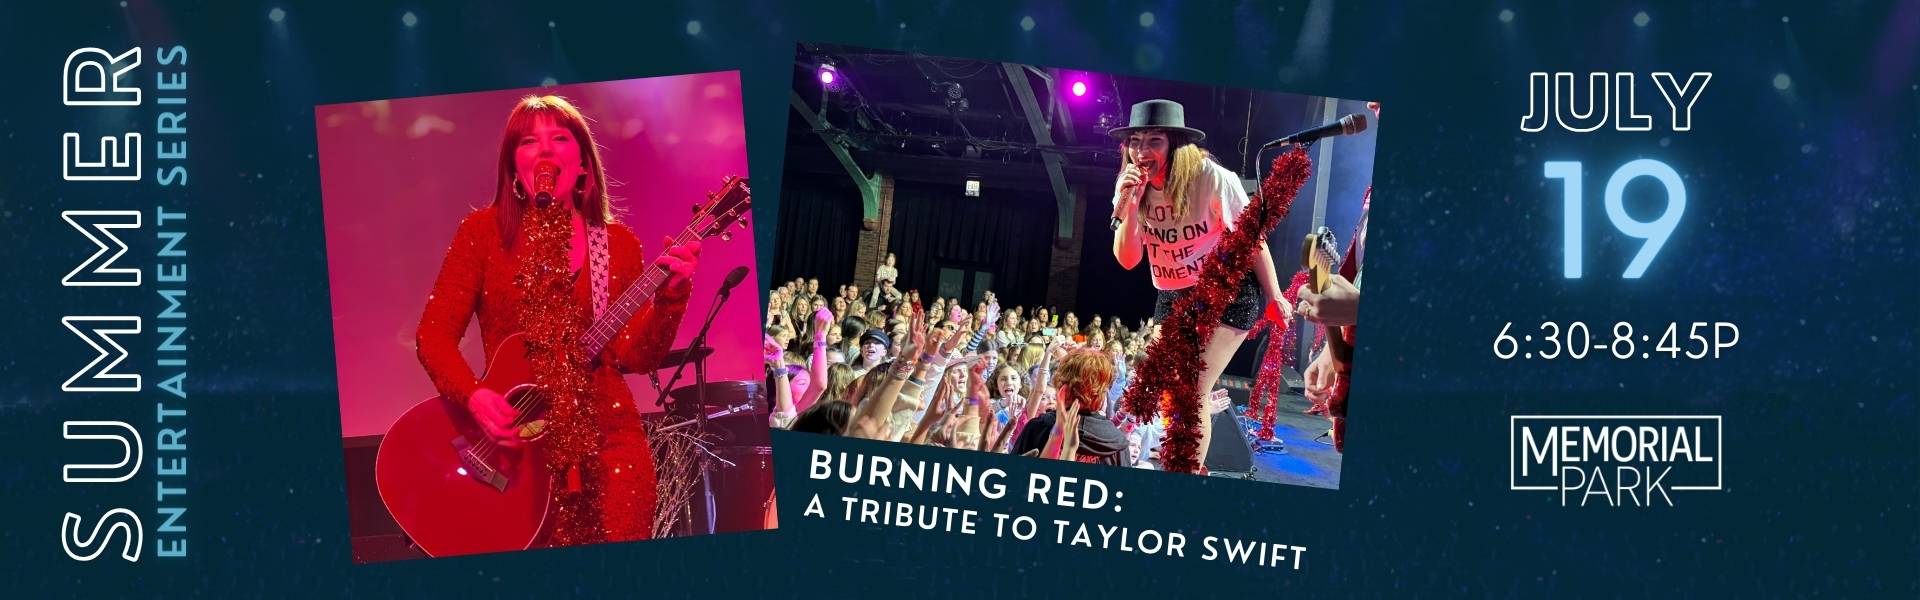 Memorial Park performance featuring Burning Red: A Tribute To Taylor Swift